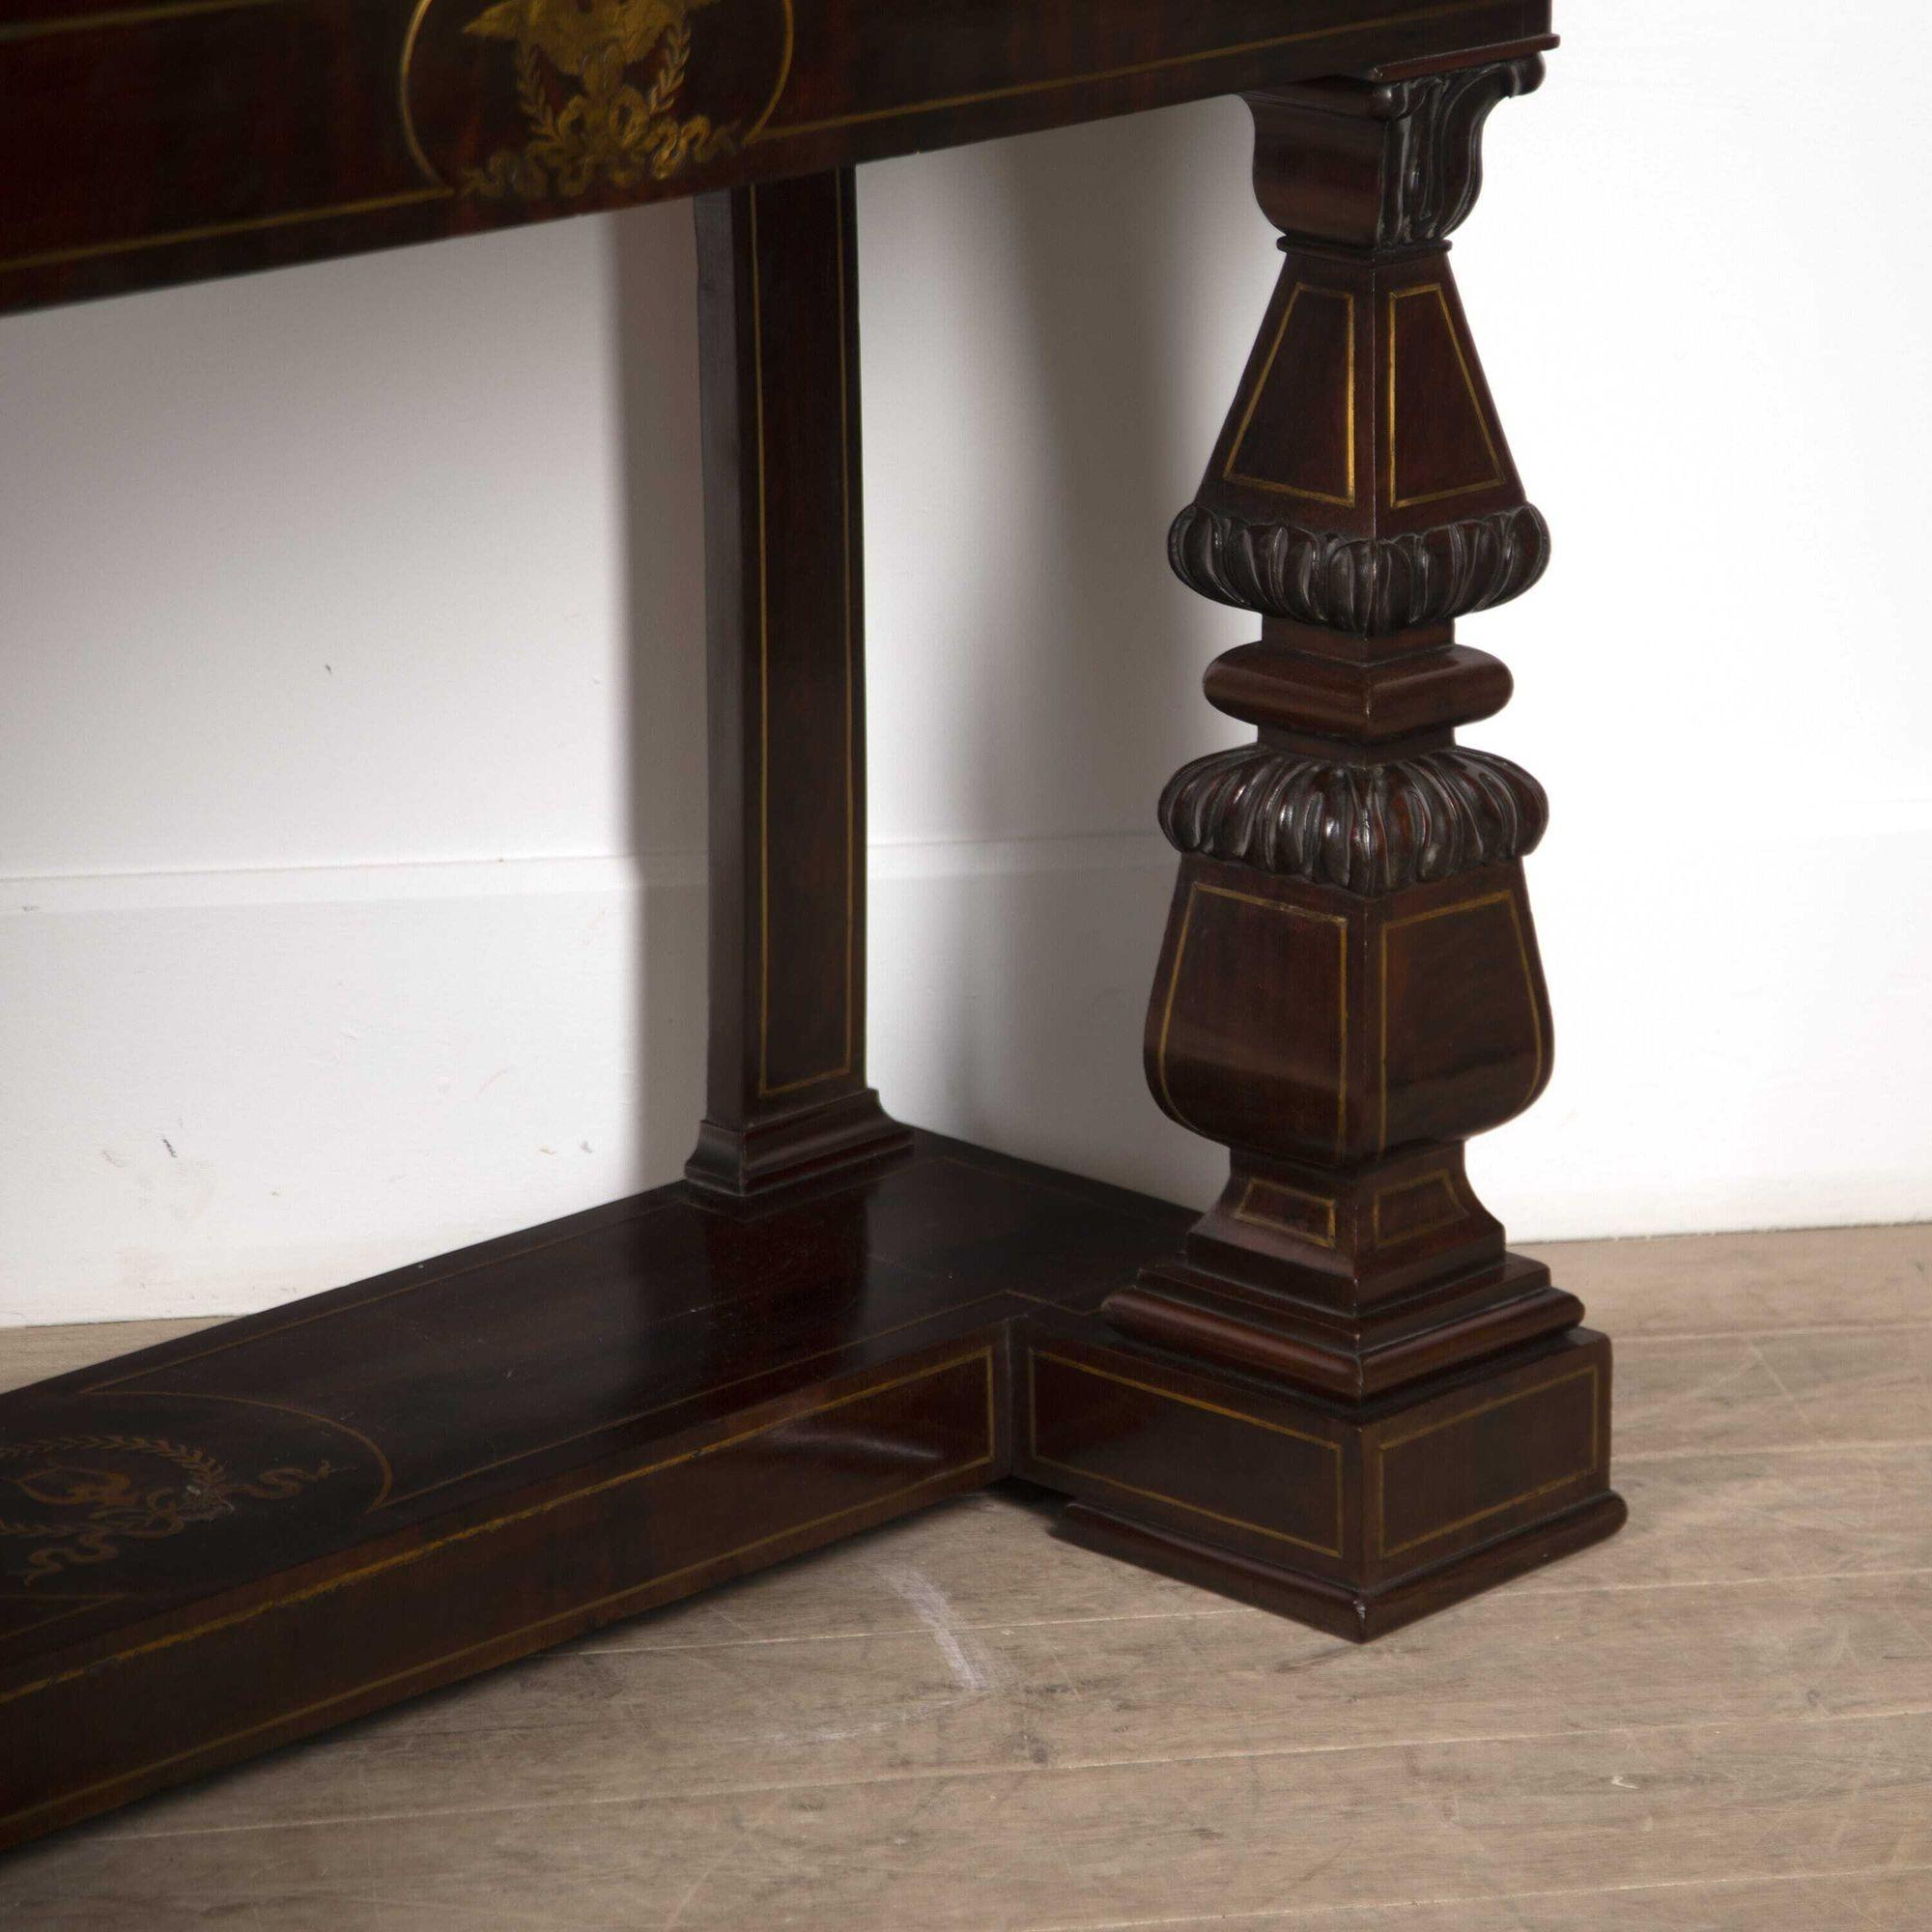 19th century Italian console table with finely inlaid brass detailing.
The front apron is centred by an eagle with outstretched wings surrounded by a wreath sitting on a tied ribbon.
The plinth base is inlaid with a lyre motif and again surrounded